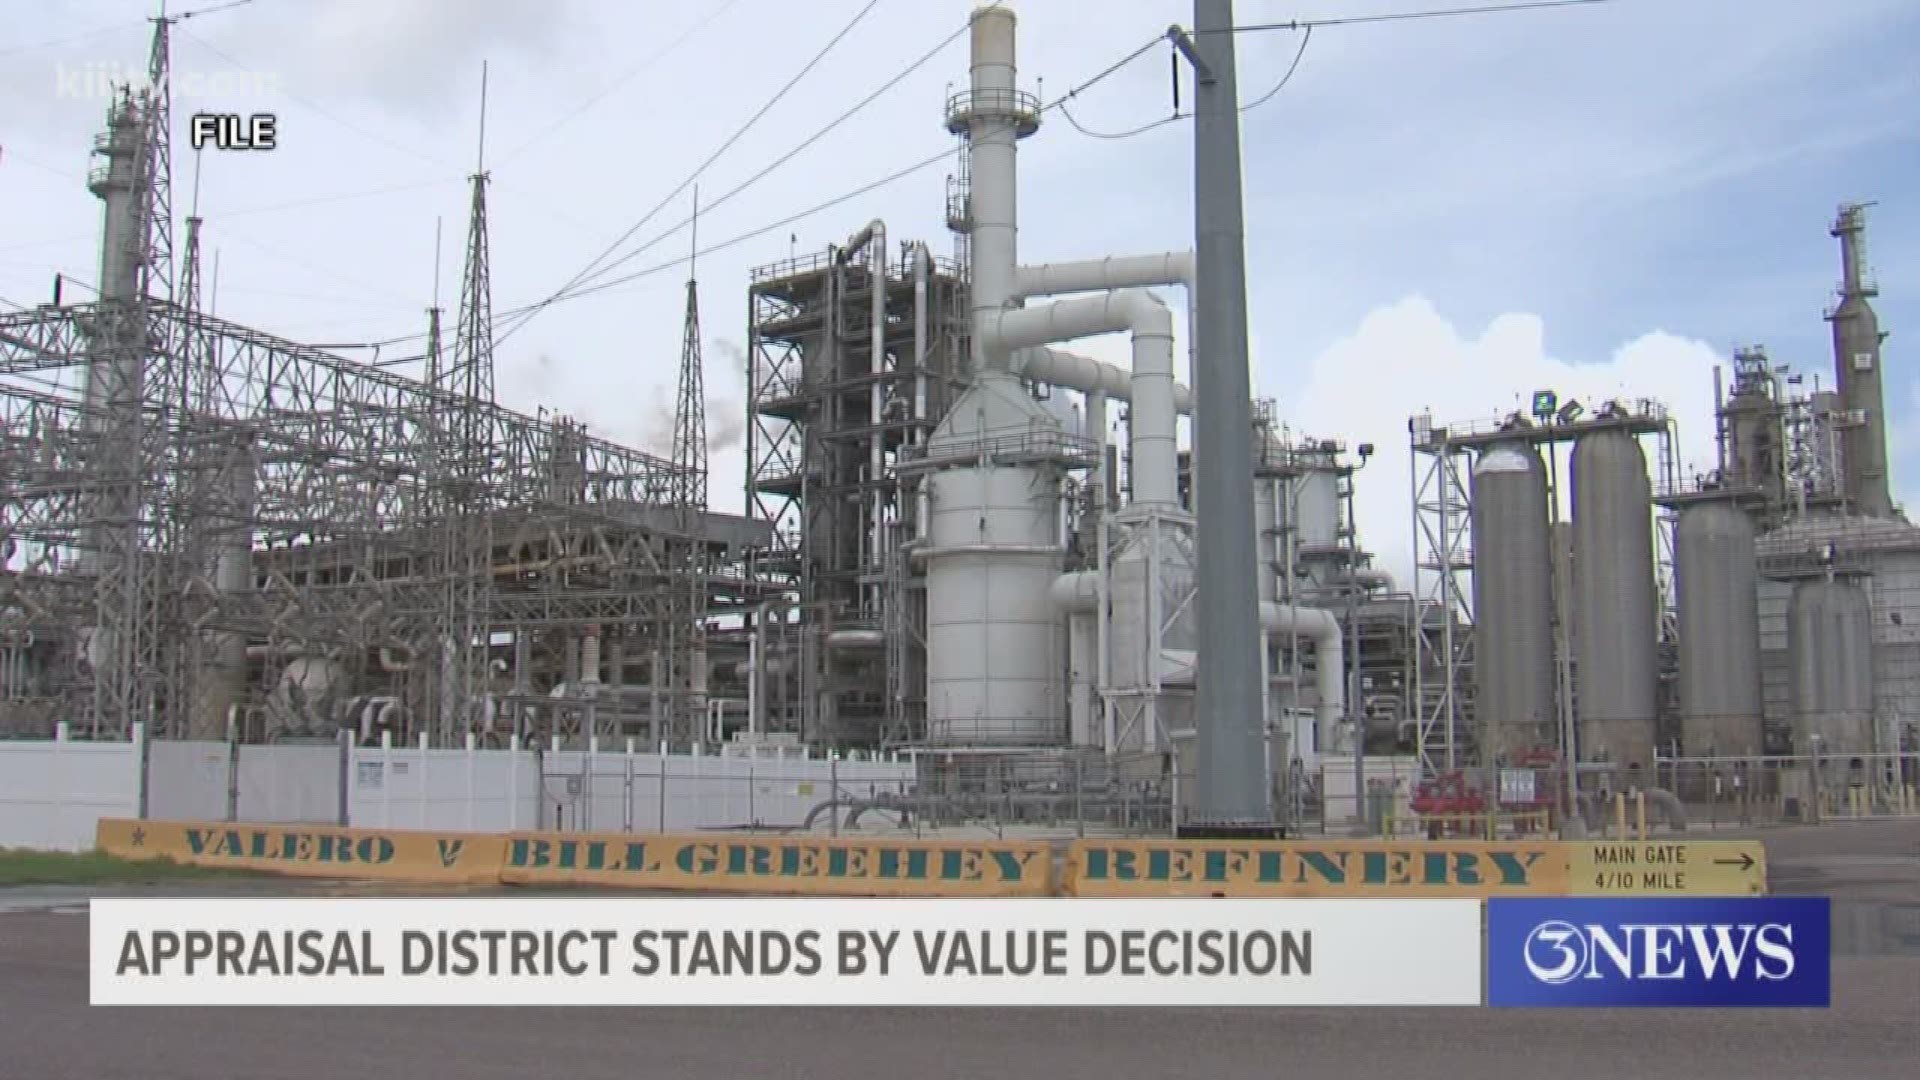 Nueces County Chief Tax Appraiser takes legal action against refinery |  